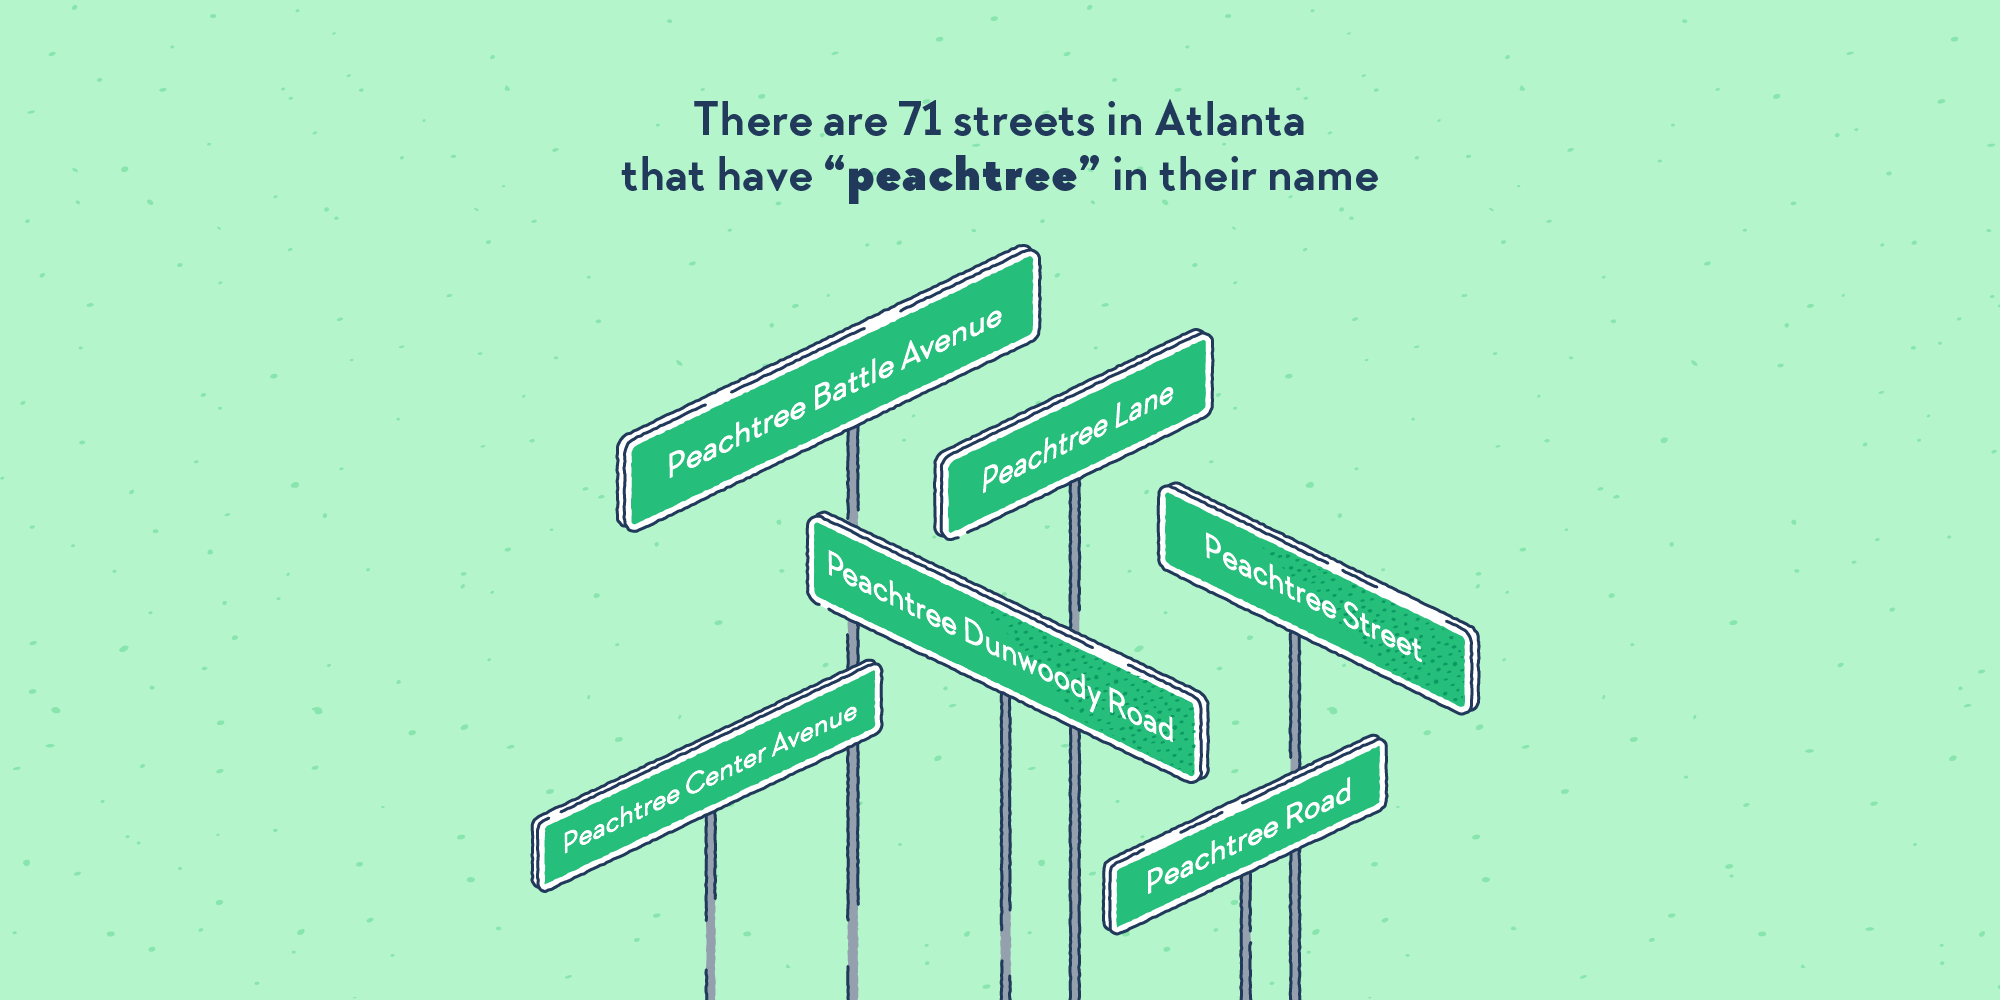 Plenty of street signs, for “Peachtree Road”, “Peachtree Lane”, “Peachtree Center Avenue”, and many others.